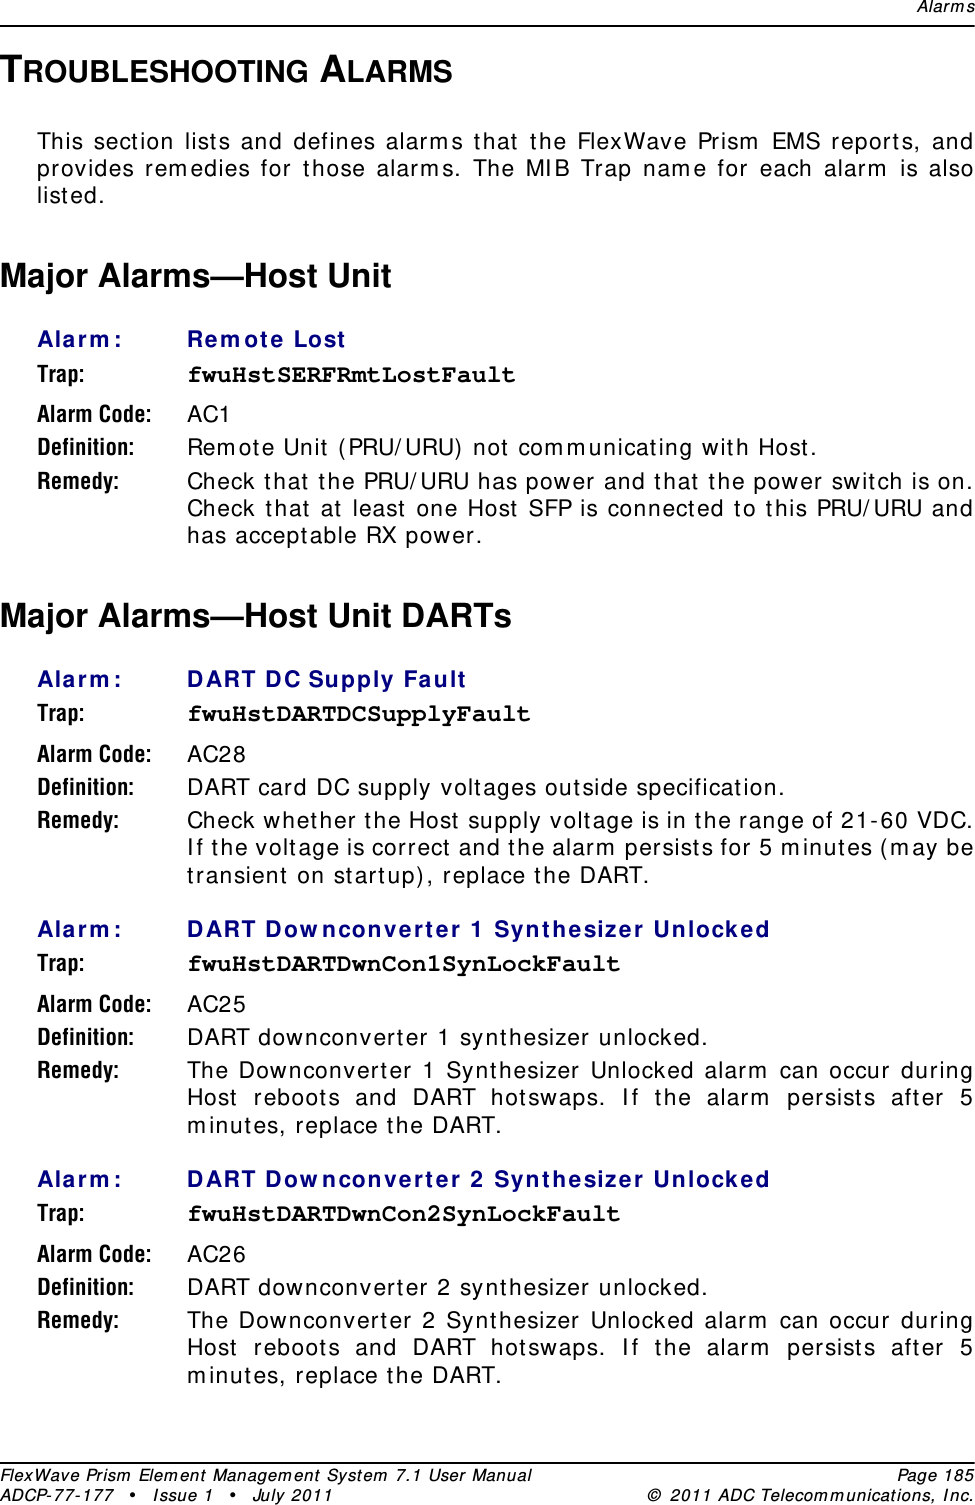 Alar m sFlexWave Prism  Elem ent Managem ent  Syst em  7.1 User Manual Page 185ADCP- 77- 177  • I ssue 1 • July 2011 ©  2011 ADC Telecom m unicat ions, I nc.TROUBLESHOOTING ALARMSThis sect ion list s and defines alarm s that t he FlexWave Prism  EMS reports, and provides rem edies for t hose alarm s. The MI B Trap nam e for each alarm  is also list ed.Major Alarms—Host Unit Ala rm : Rem ot e  LostTrap: fwuHstSERFRmtLostFaultAlarm Code: AC1Definition: Rem ot e Unit  ( PRU/ URU)  not  com m unicating wit h Host .Remedy: Check t hat  the PRU/ URU has power and t hat  the power swit ch is on. Check t hat  at least  one Host SFP is connect ed t o t his PRU/ URU and has acceptable RX power.Major Alarms—Host Unit DARTs Ala rm : DART D C Supply FaultTrap: fwuHstDARTDCSupplyFaultAlarm Code: AC28Definition: DART card DC supply volt ages outside specificat ion.Remedy: Check whether the Host  supply volt age is in the range of 21-60 VDC. I f t he volt age is correct and the alarm  persists for 5 m inutes (m ay be transient  on st art up) , replace the DART.Ala rm : DART D ow nconvert e r 1  Syn thesizer UnlockedTrap: fwuHstDARTDwnCon1SynLockFaultAlarm Code: AC25Definition: DART downconvert er 1 synt hesizer unlocked.Remedy: The Downconverter 1 Synt hesizer Unlocked alarm  can occur during Host reboot s and DART hotswaps. I f the alarm  persists aft er 5 m inutes, replace the DART.Ala rm : DART D ow nconvert e r 2  Synthesize r Unlock edTrap: fwuHstDARTDwnCon2SynLockFaultAlarm Code: AC26Definition: DART downconvert er 2 synt hesizer unlocked.Remedy: The Downconverter 2 Synt hesizer Unlocked alarm  can occur during Host reboot s and DART hotswaps. I f the alarm  persists aft er 5 m inutes, replace the DART.